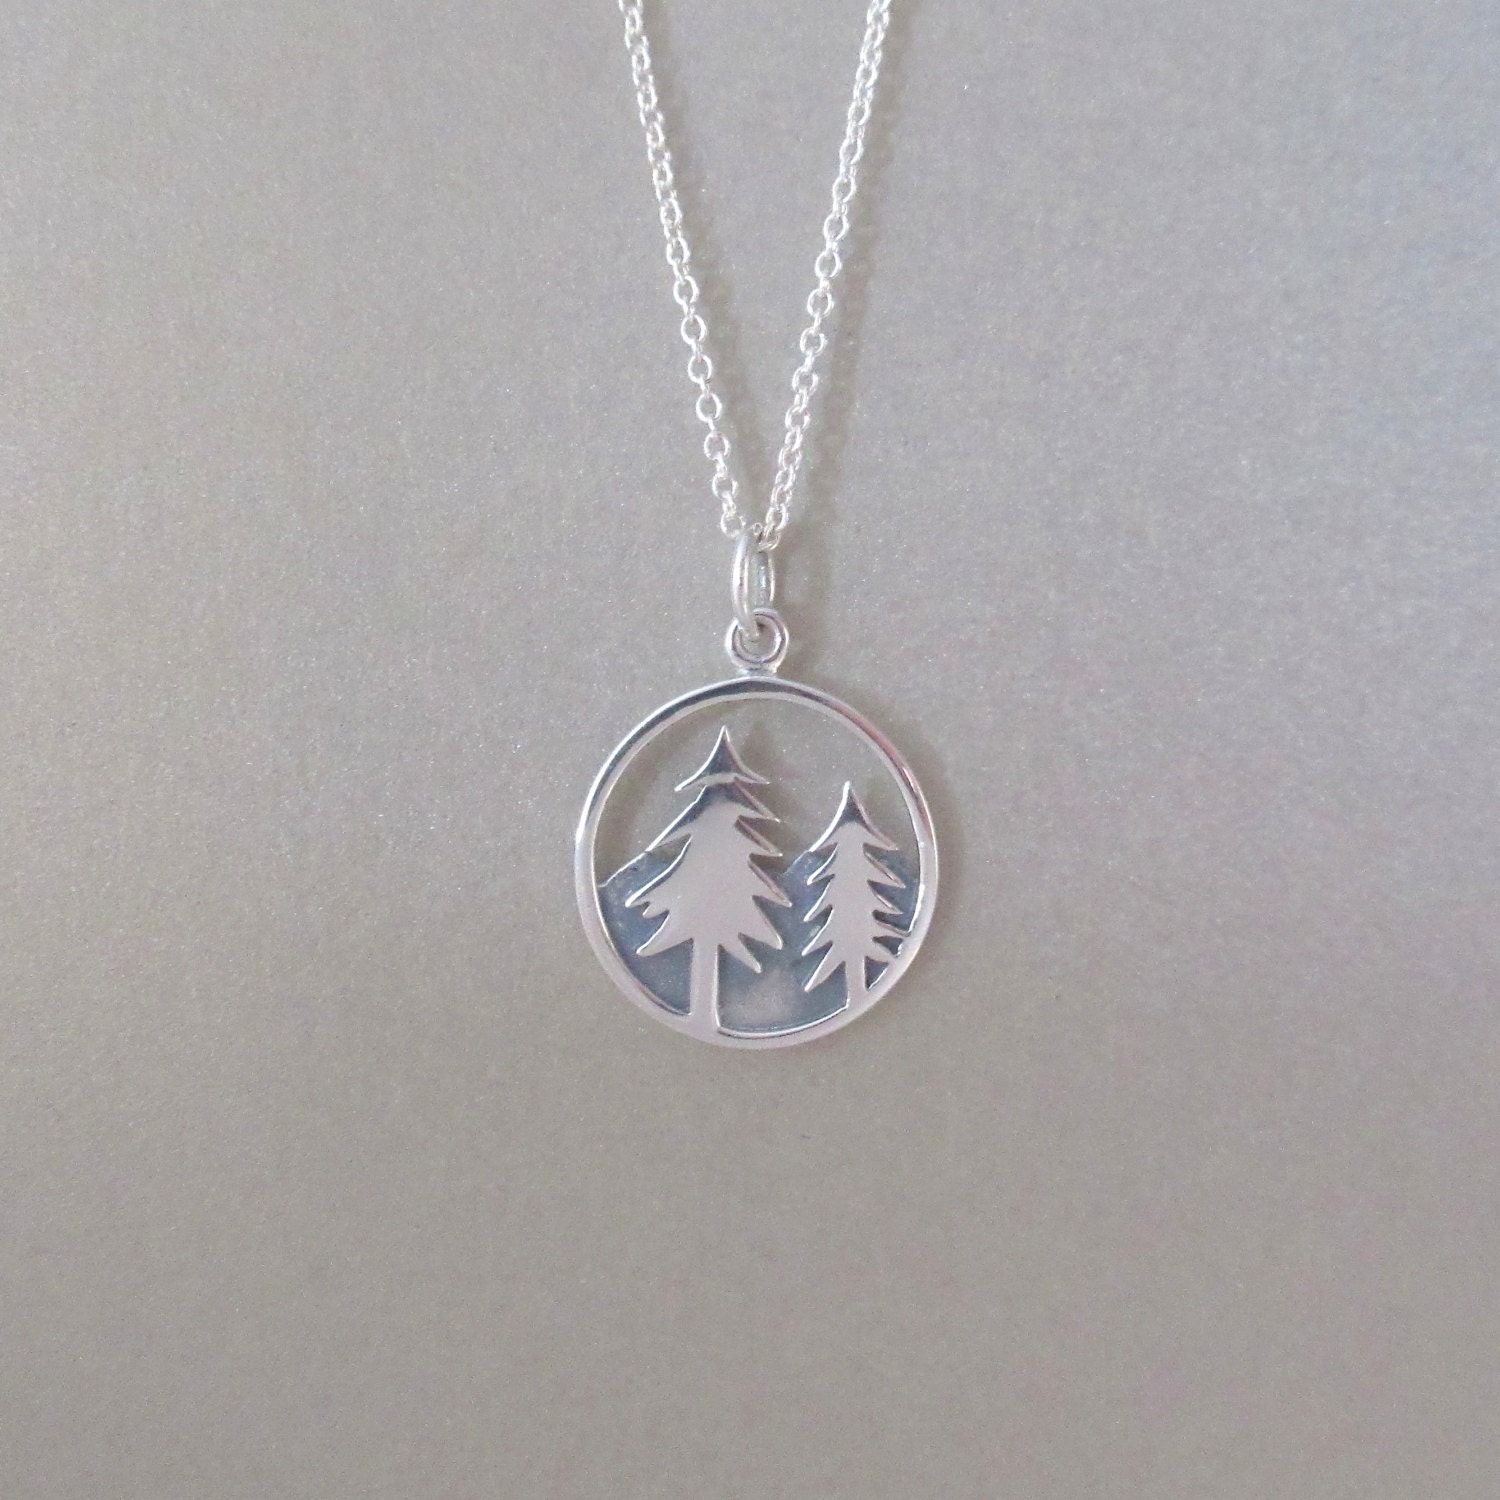 Tree & Mountain Pendant Necklace Silver Outdoor Hiker | Etsy